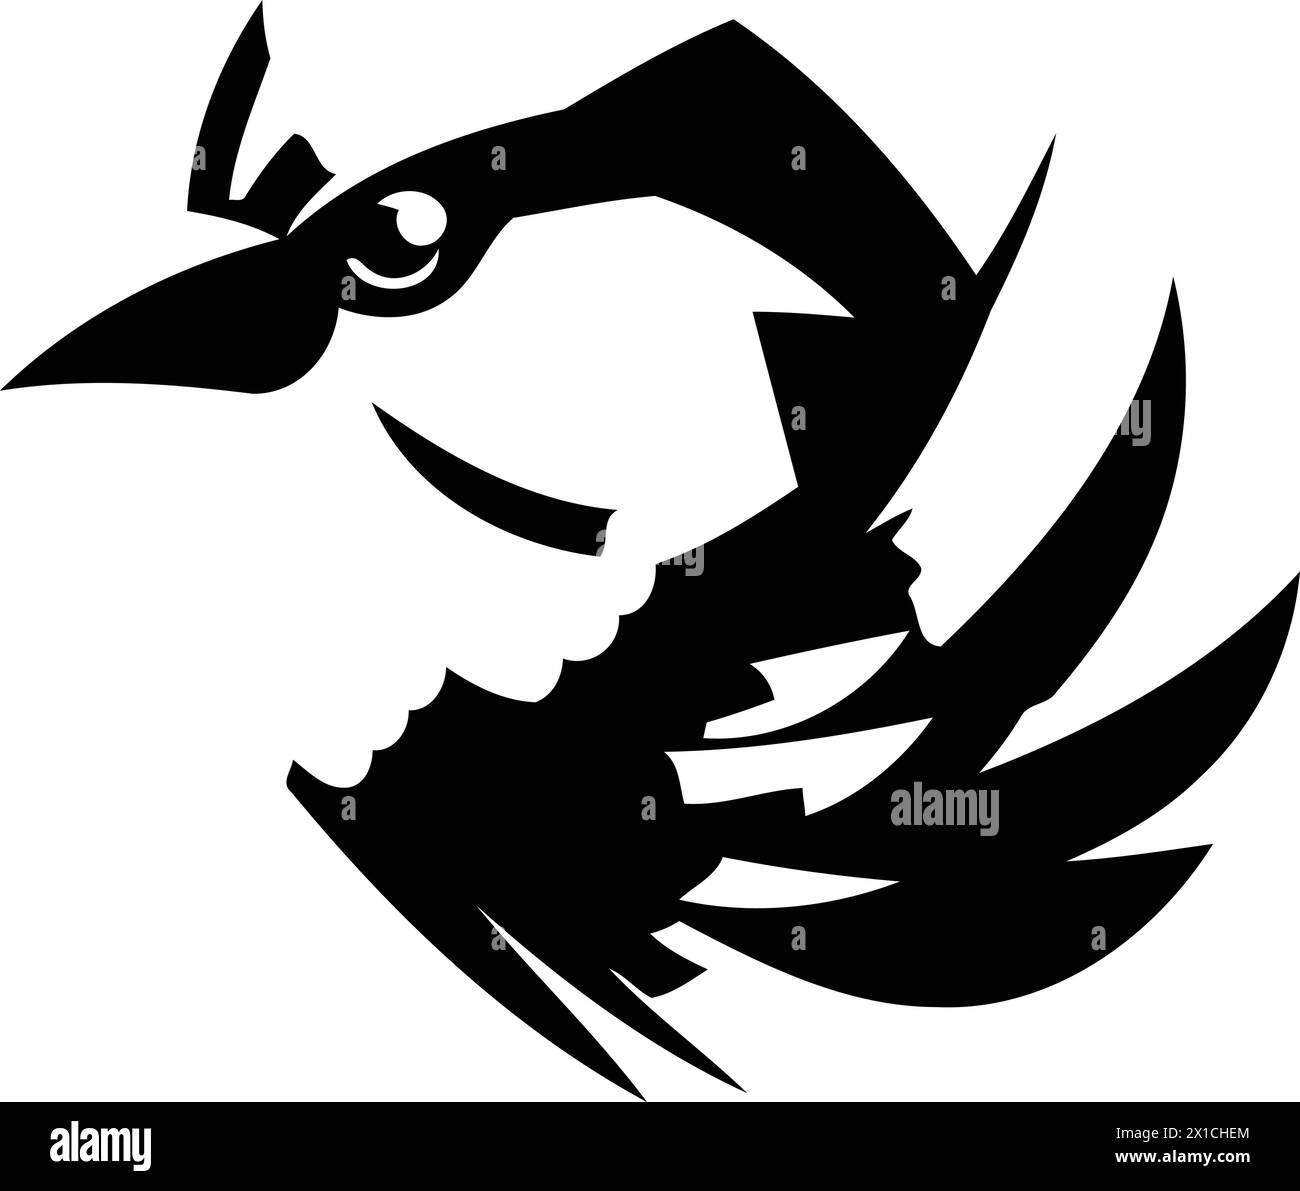 Blue jay bird. Vector illustration isolated on a white background. Stock Vector